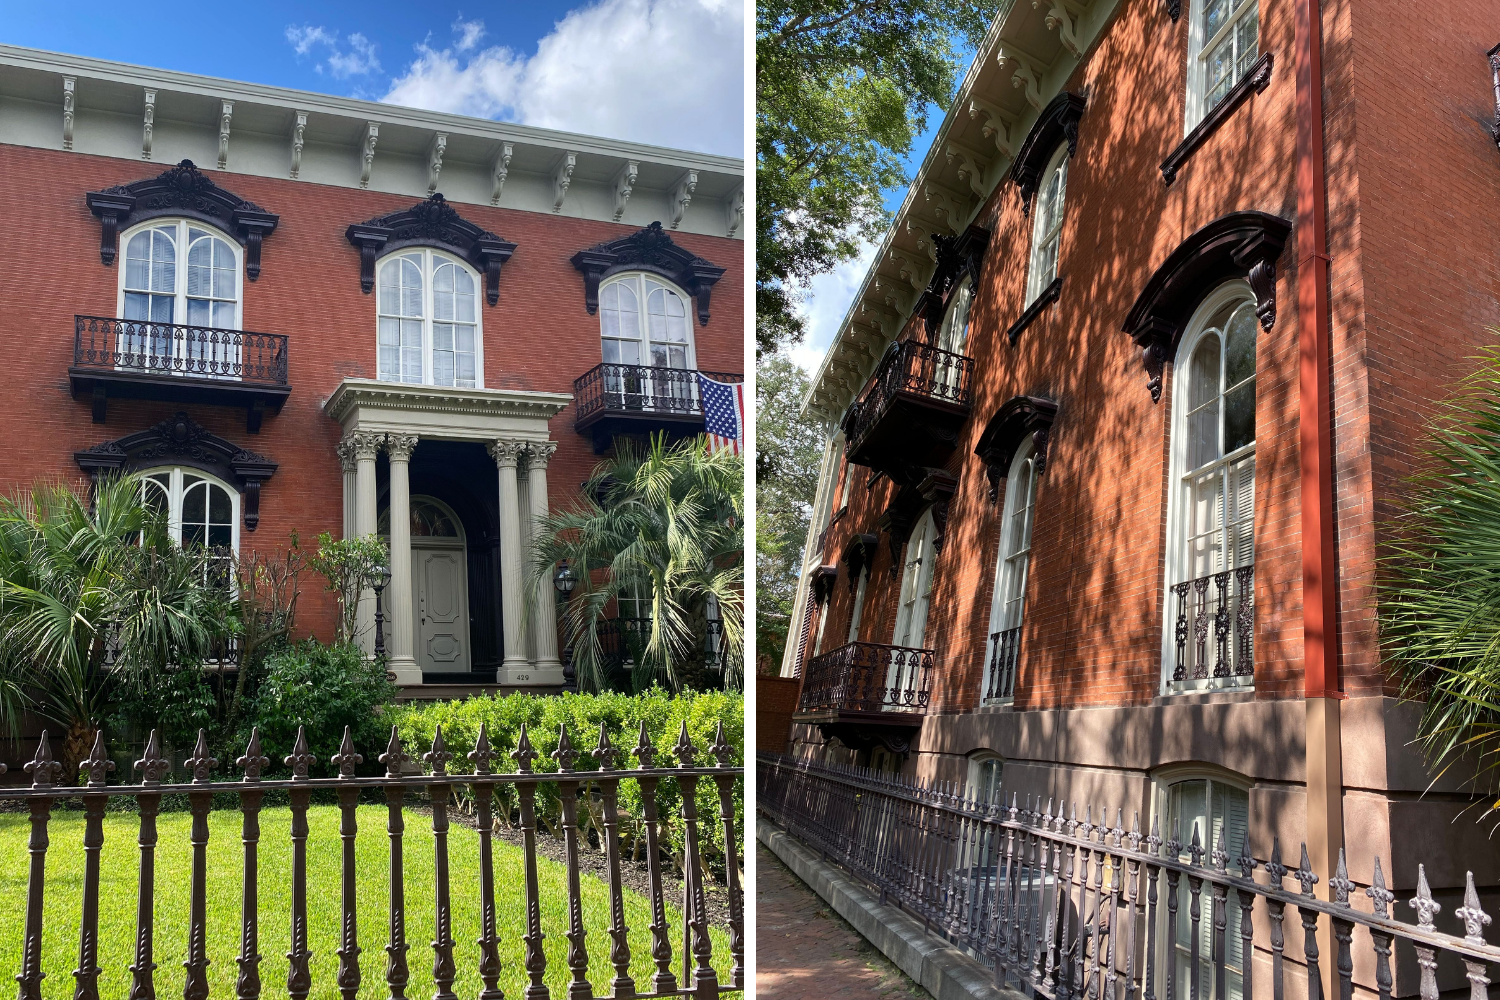 Superior-Construction-and-Design-Family-Travel-Design-Lovers-Guide-To-Savannah-GA-Architecture-Styles